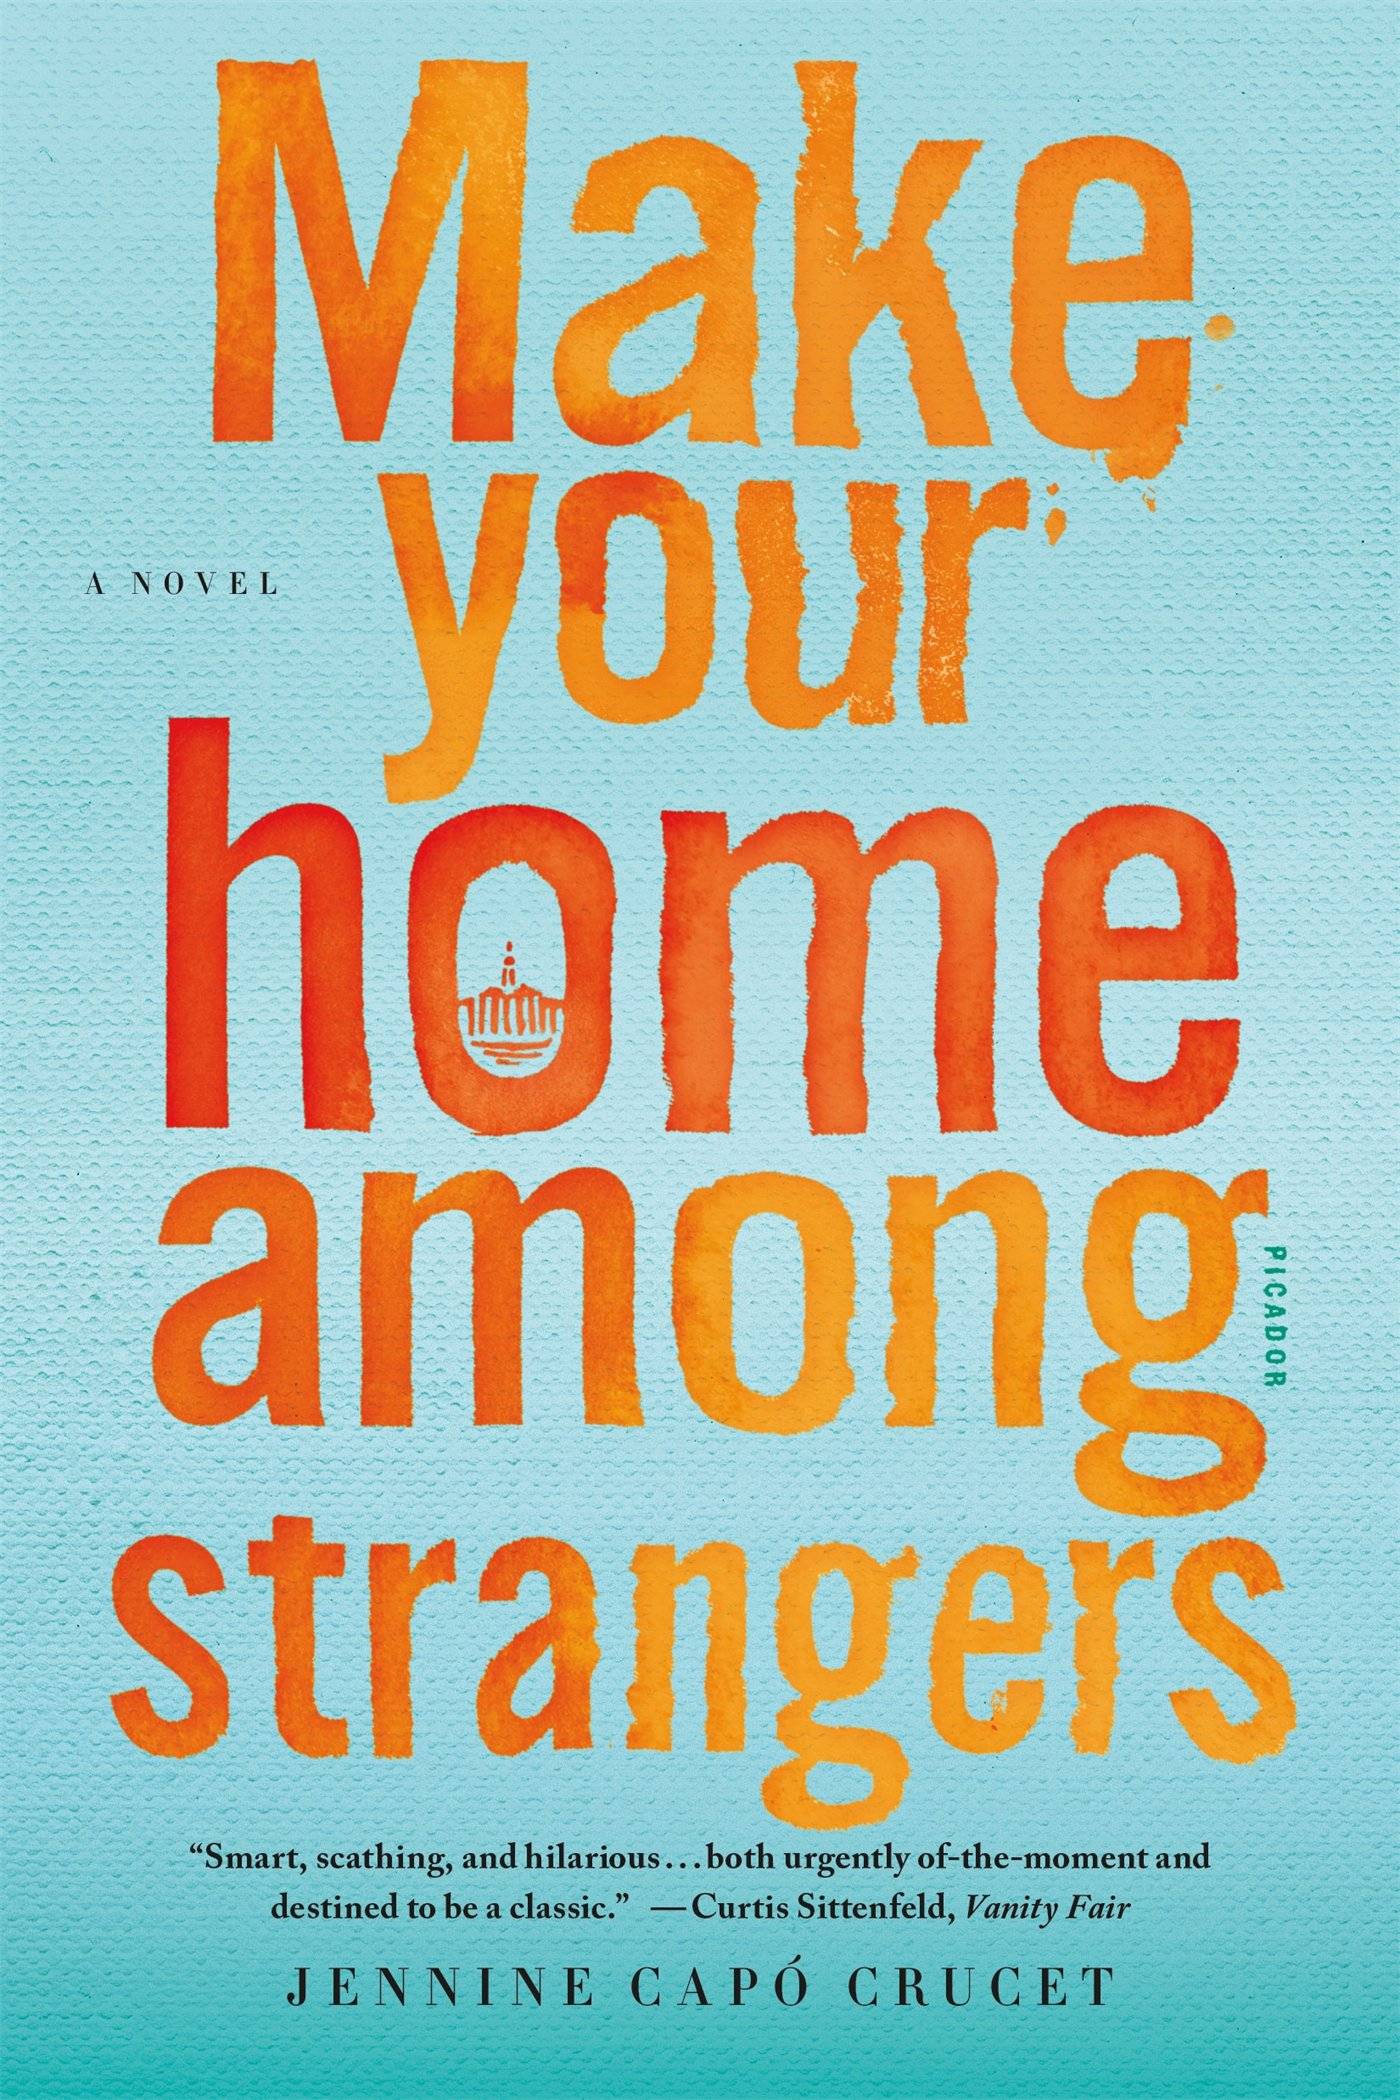 Blue "make your home among strangers" book cover with orange and red title text